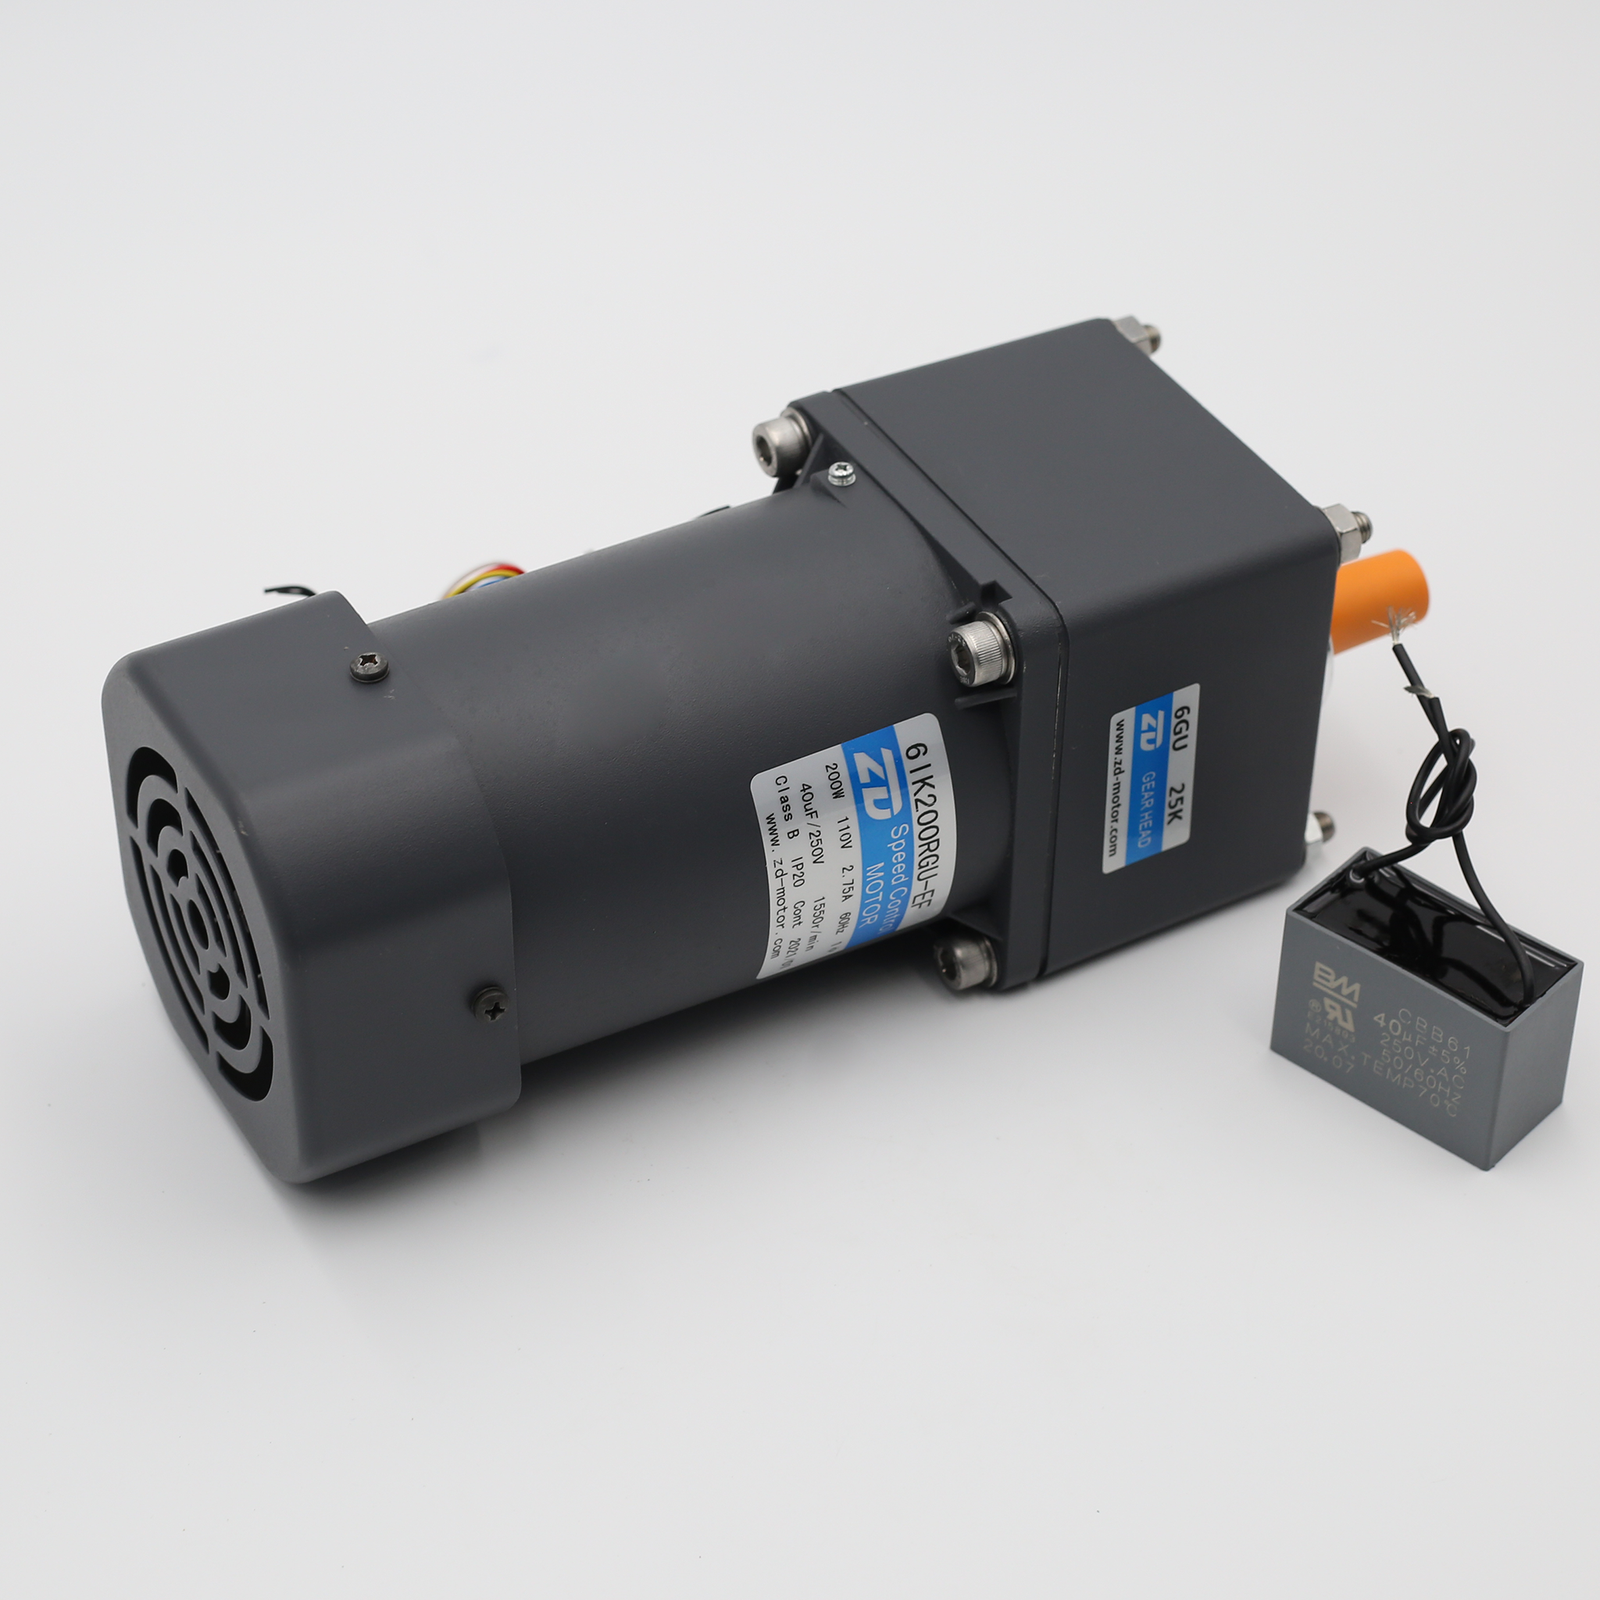 Drive Motor and Transmission 110v parts for continuous band sealers